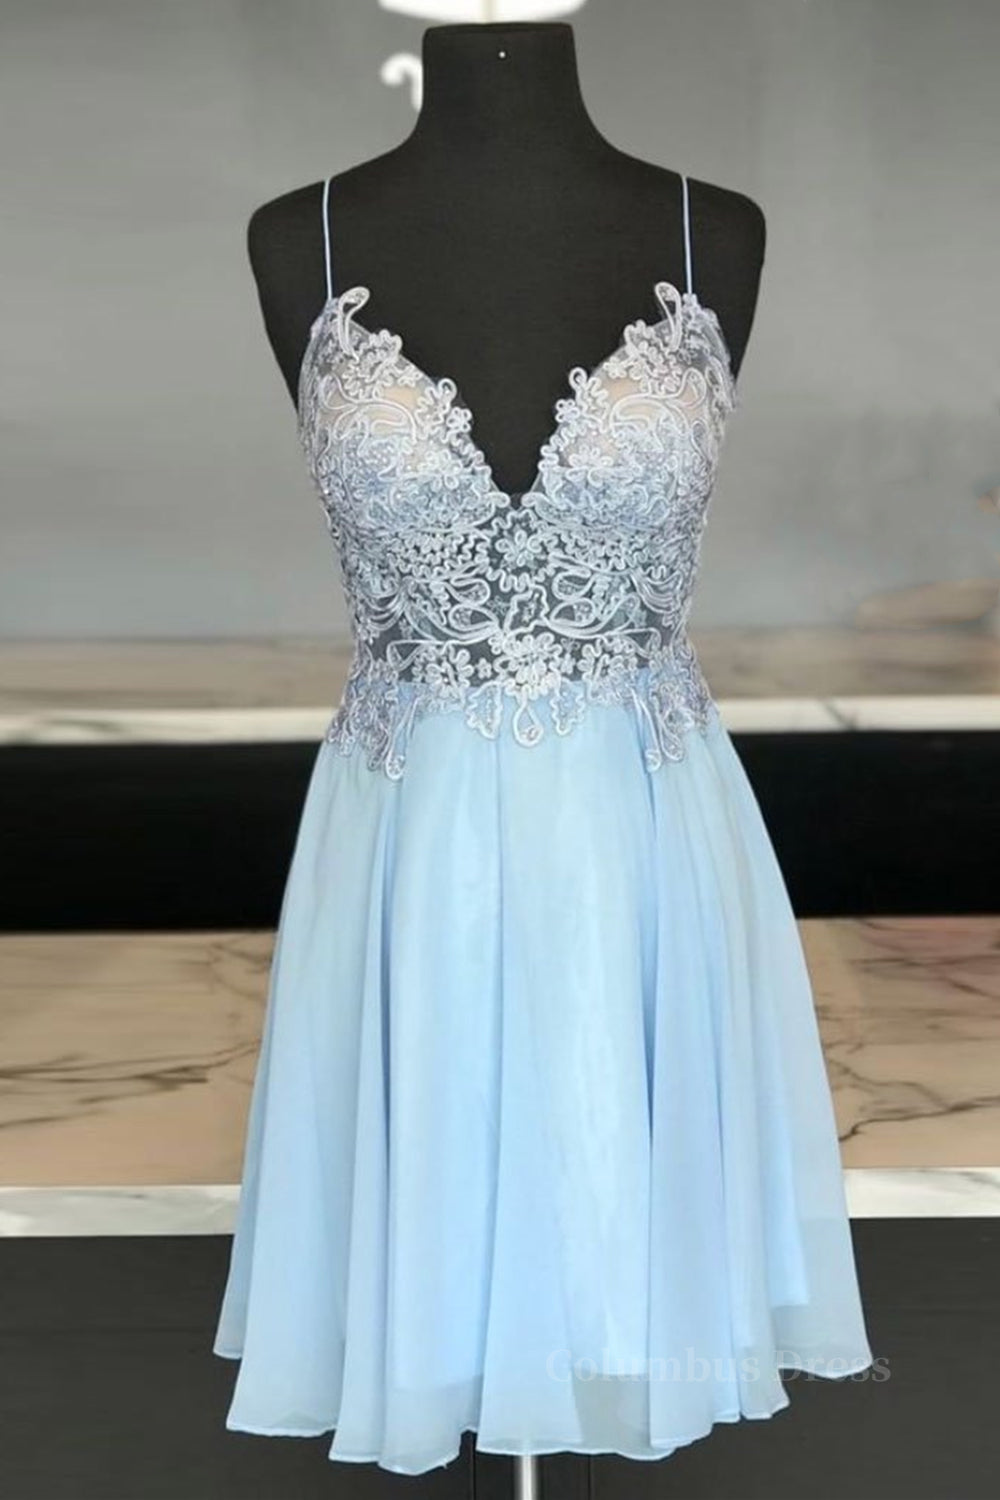 V Neck Open Back Blue Lace Short Corset Prom Dresses, Blue Lace Corset Homecoming Dresses, Short Blue Corset Formal Evening Dresses outfit, Trendy Dress Outfit